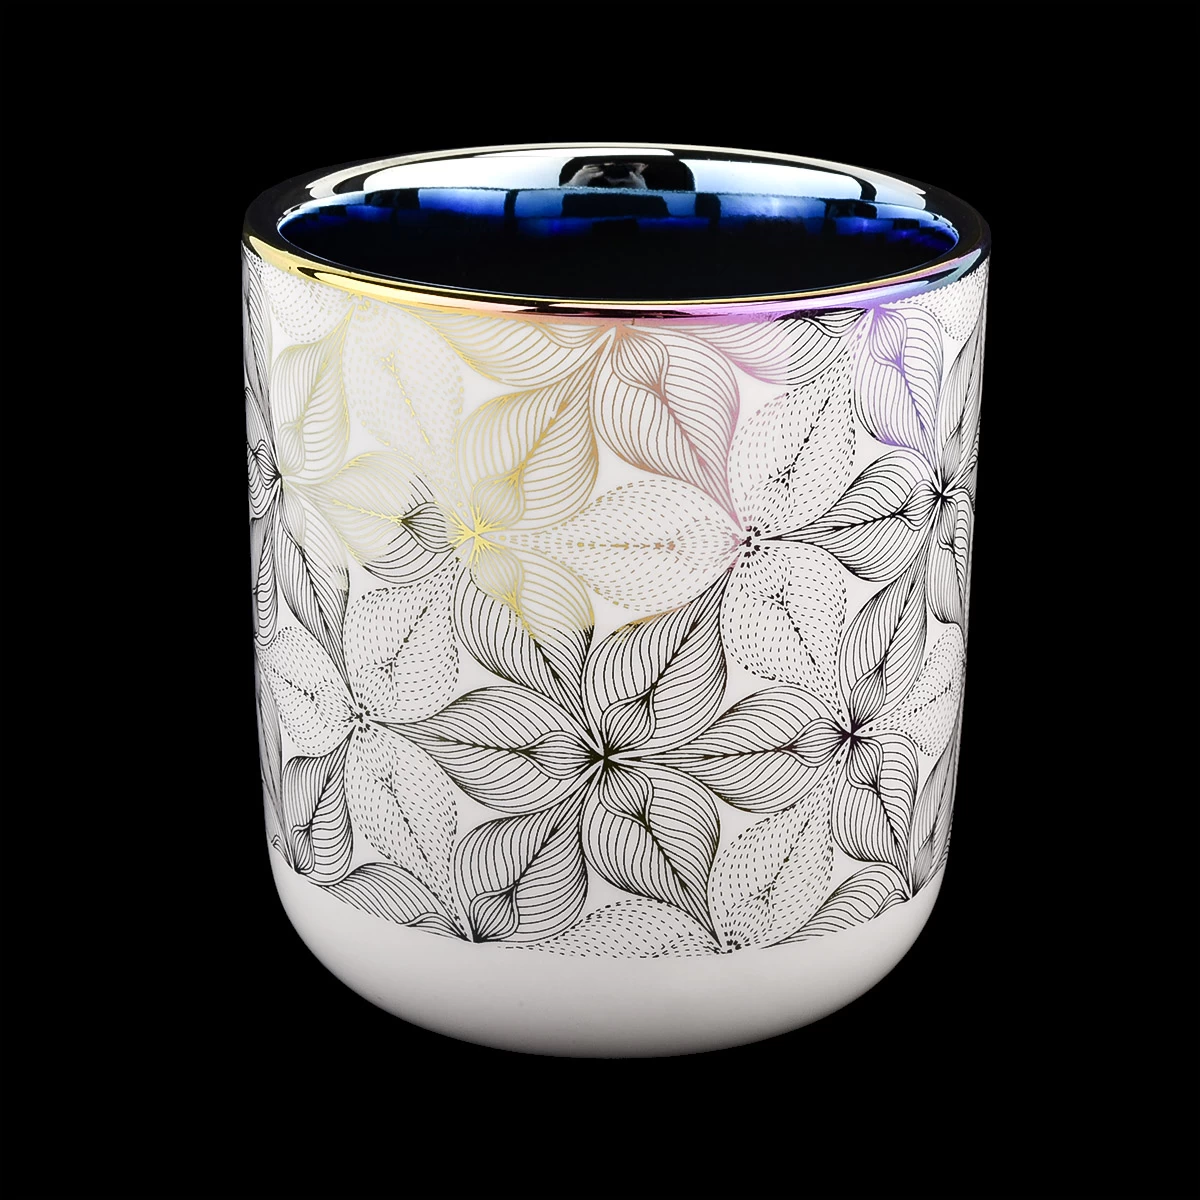 round bottom white ceramic candle jars Item No .: SGXYT20112717 Top dia: 88mm Bottom dia: 45mm Height: 98mm Weight: 309g Capacity: 405ml  MOQ: 3000 pieces new electroplating ceramic candle jars